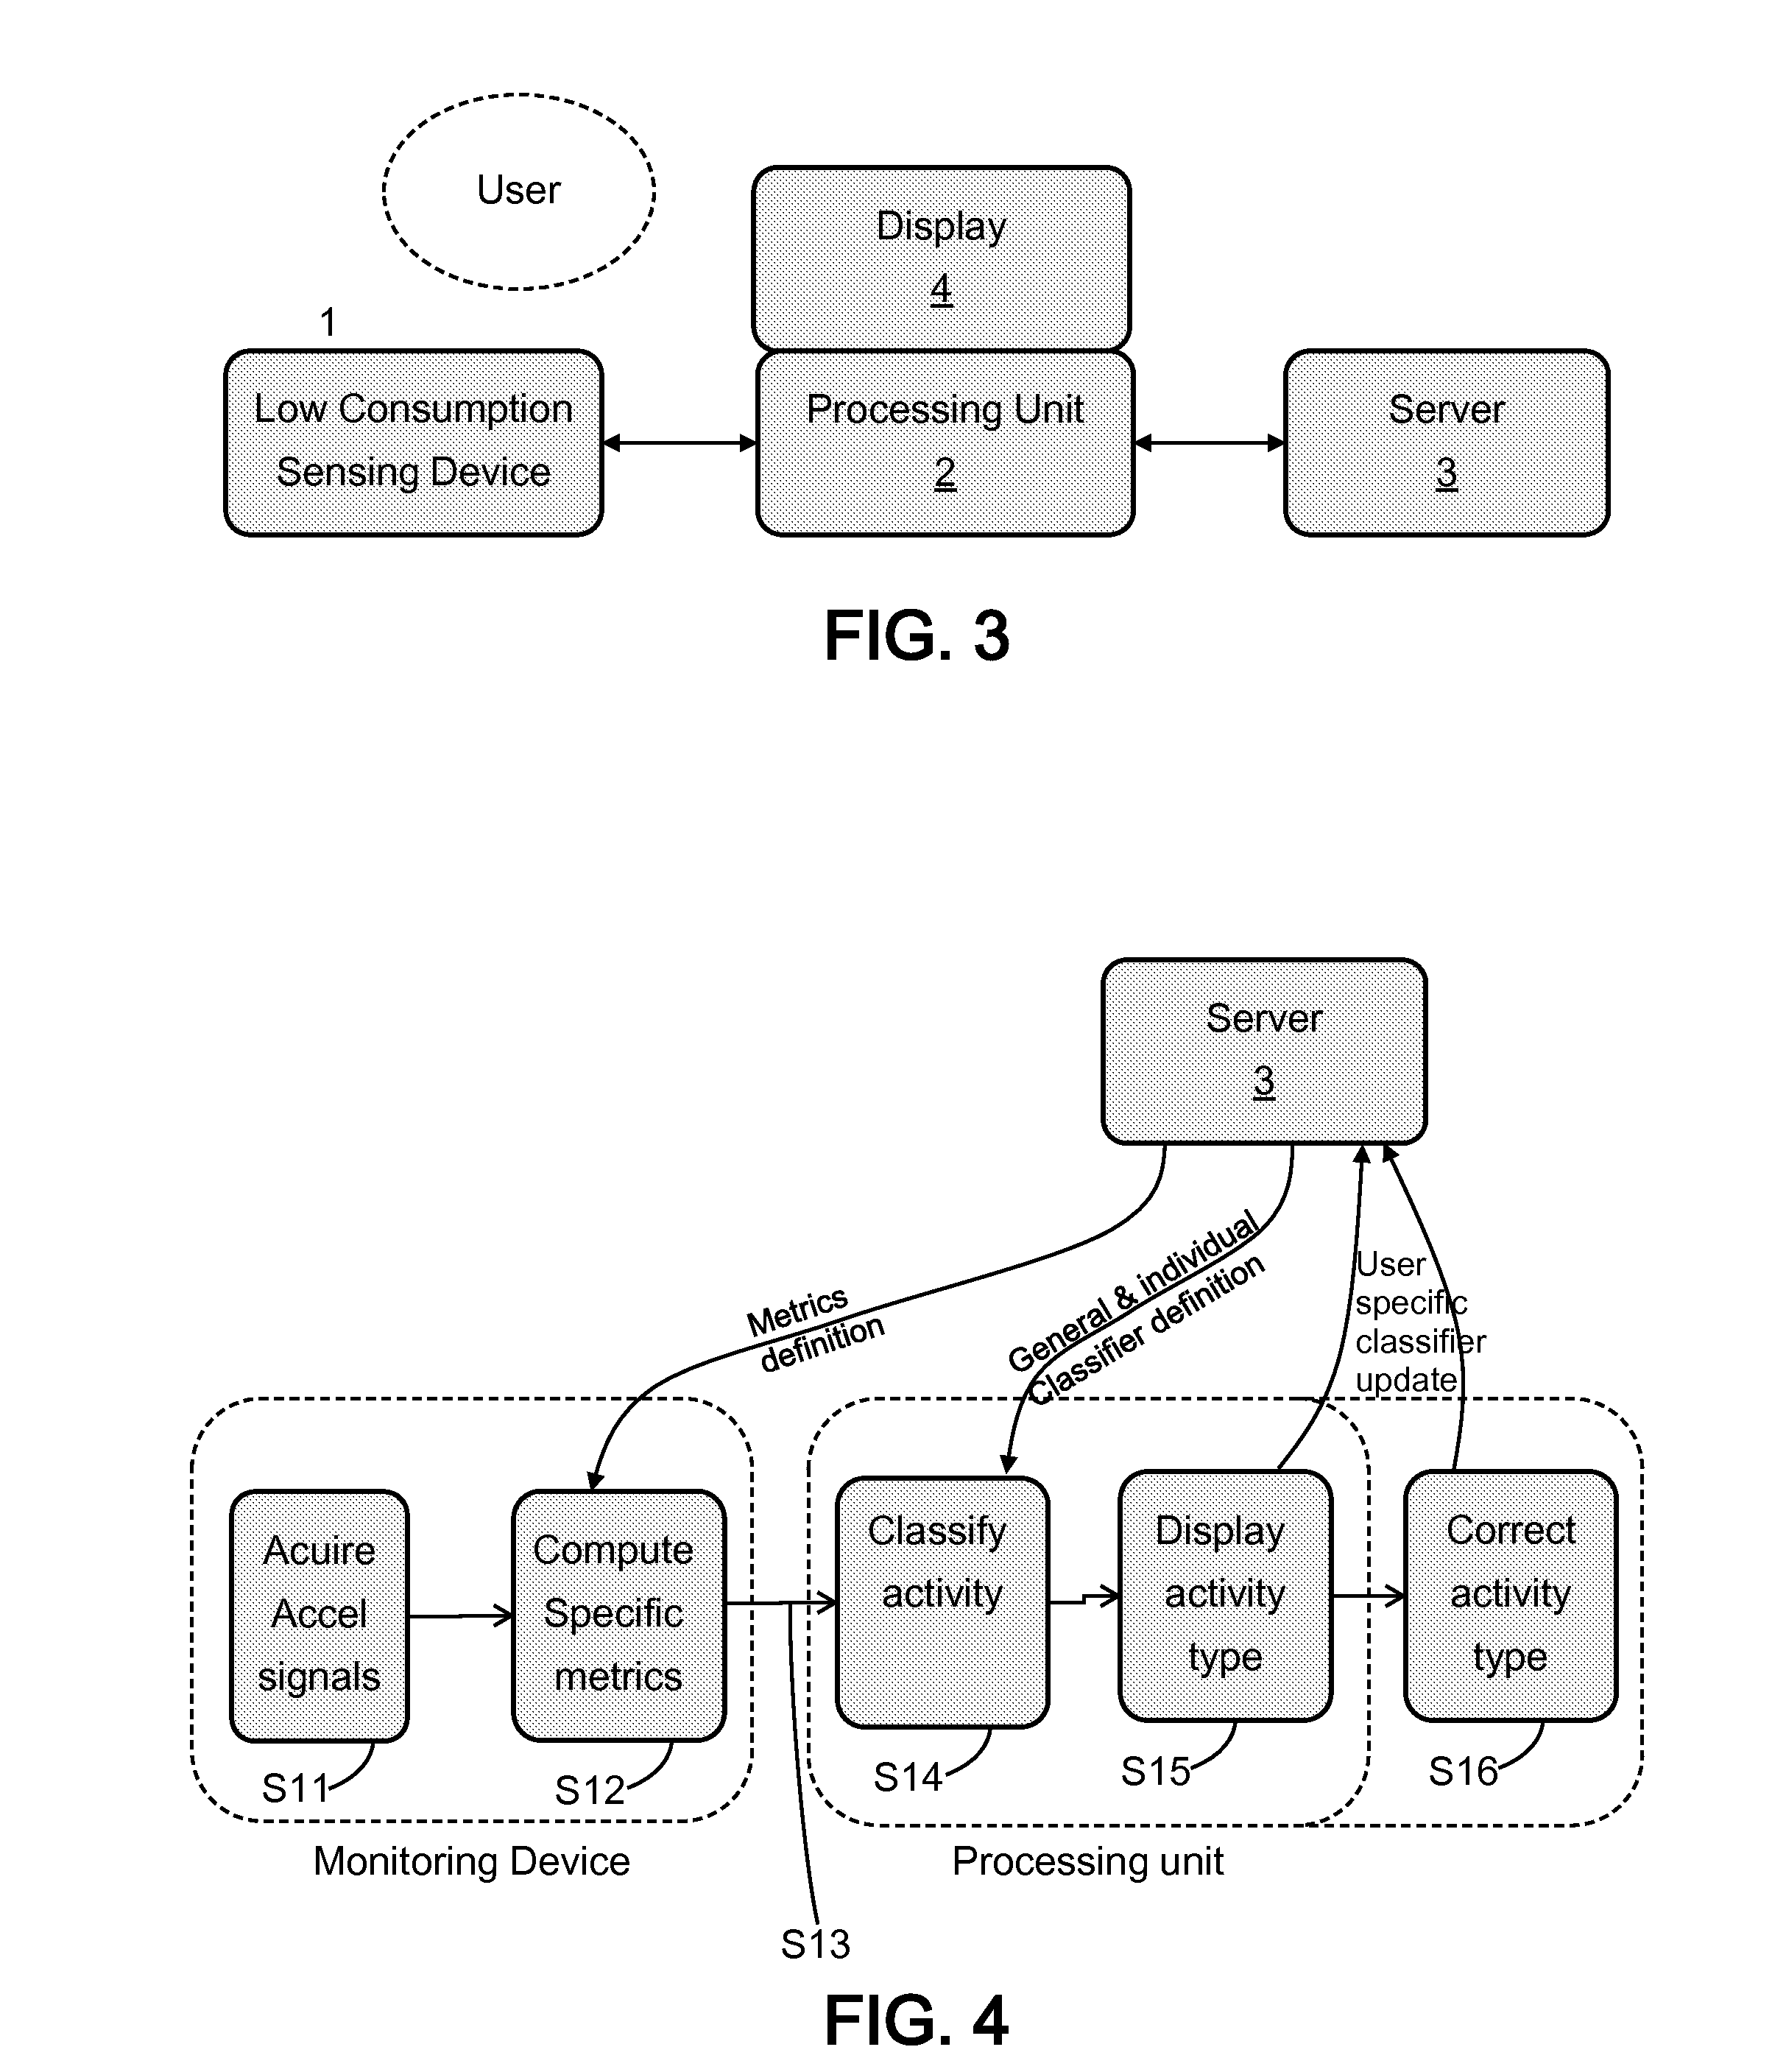 System and Method to Recognize Activities Performed by an Individual